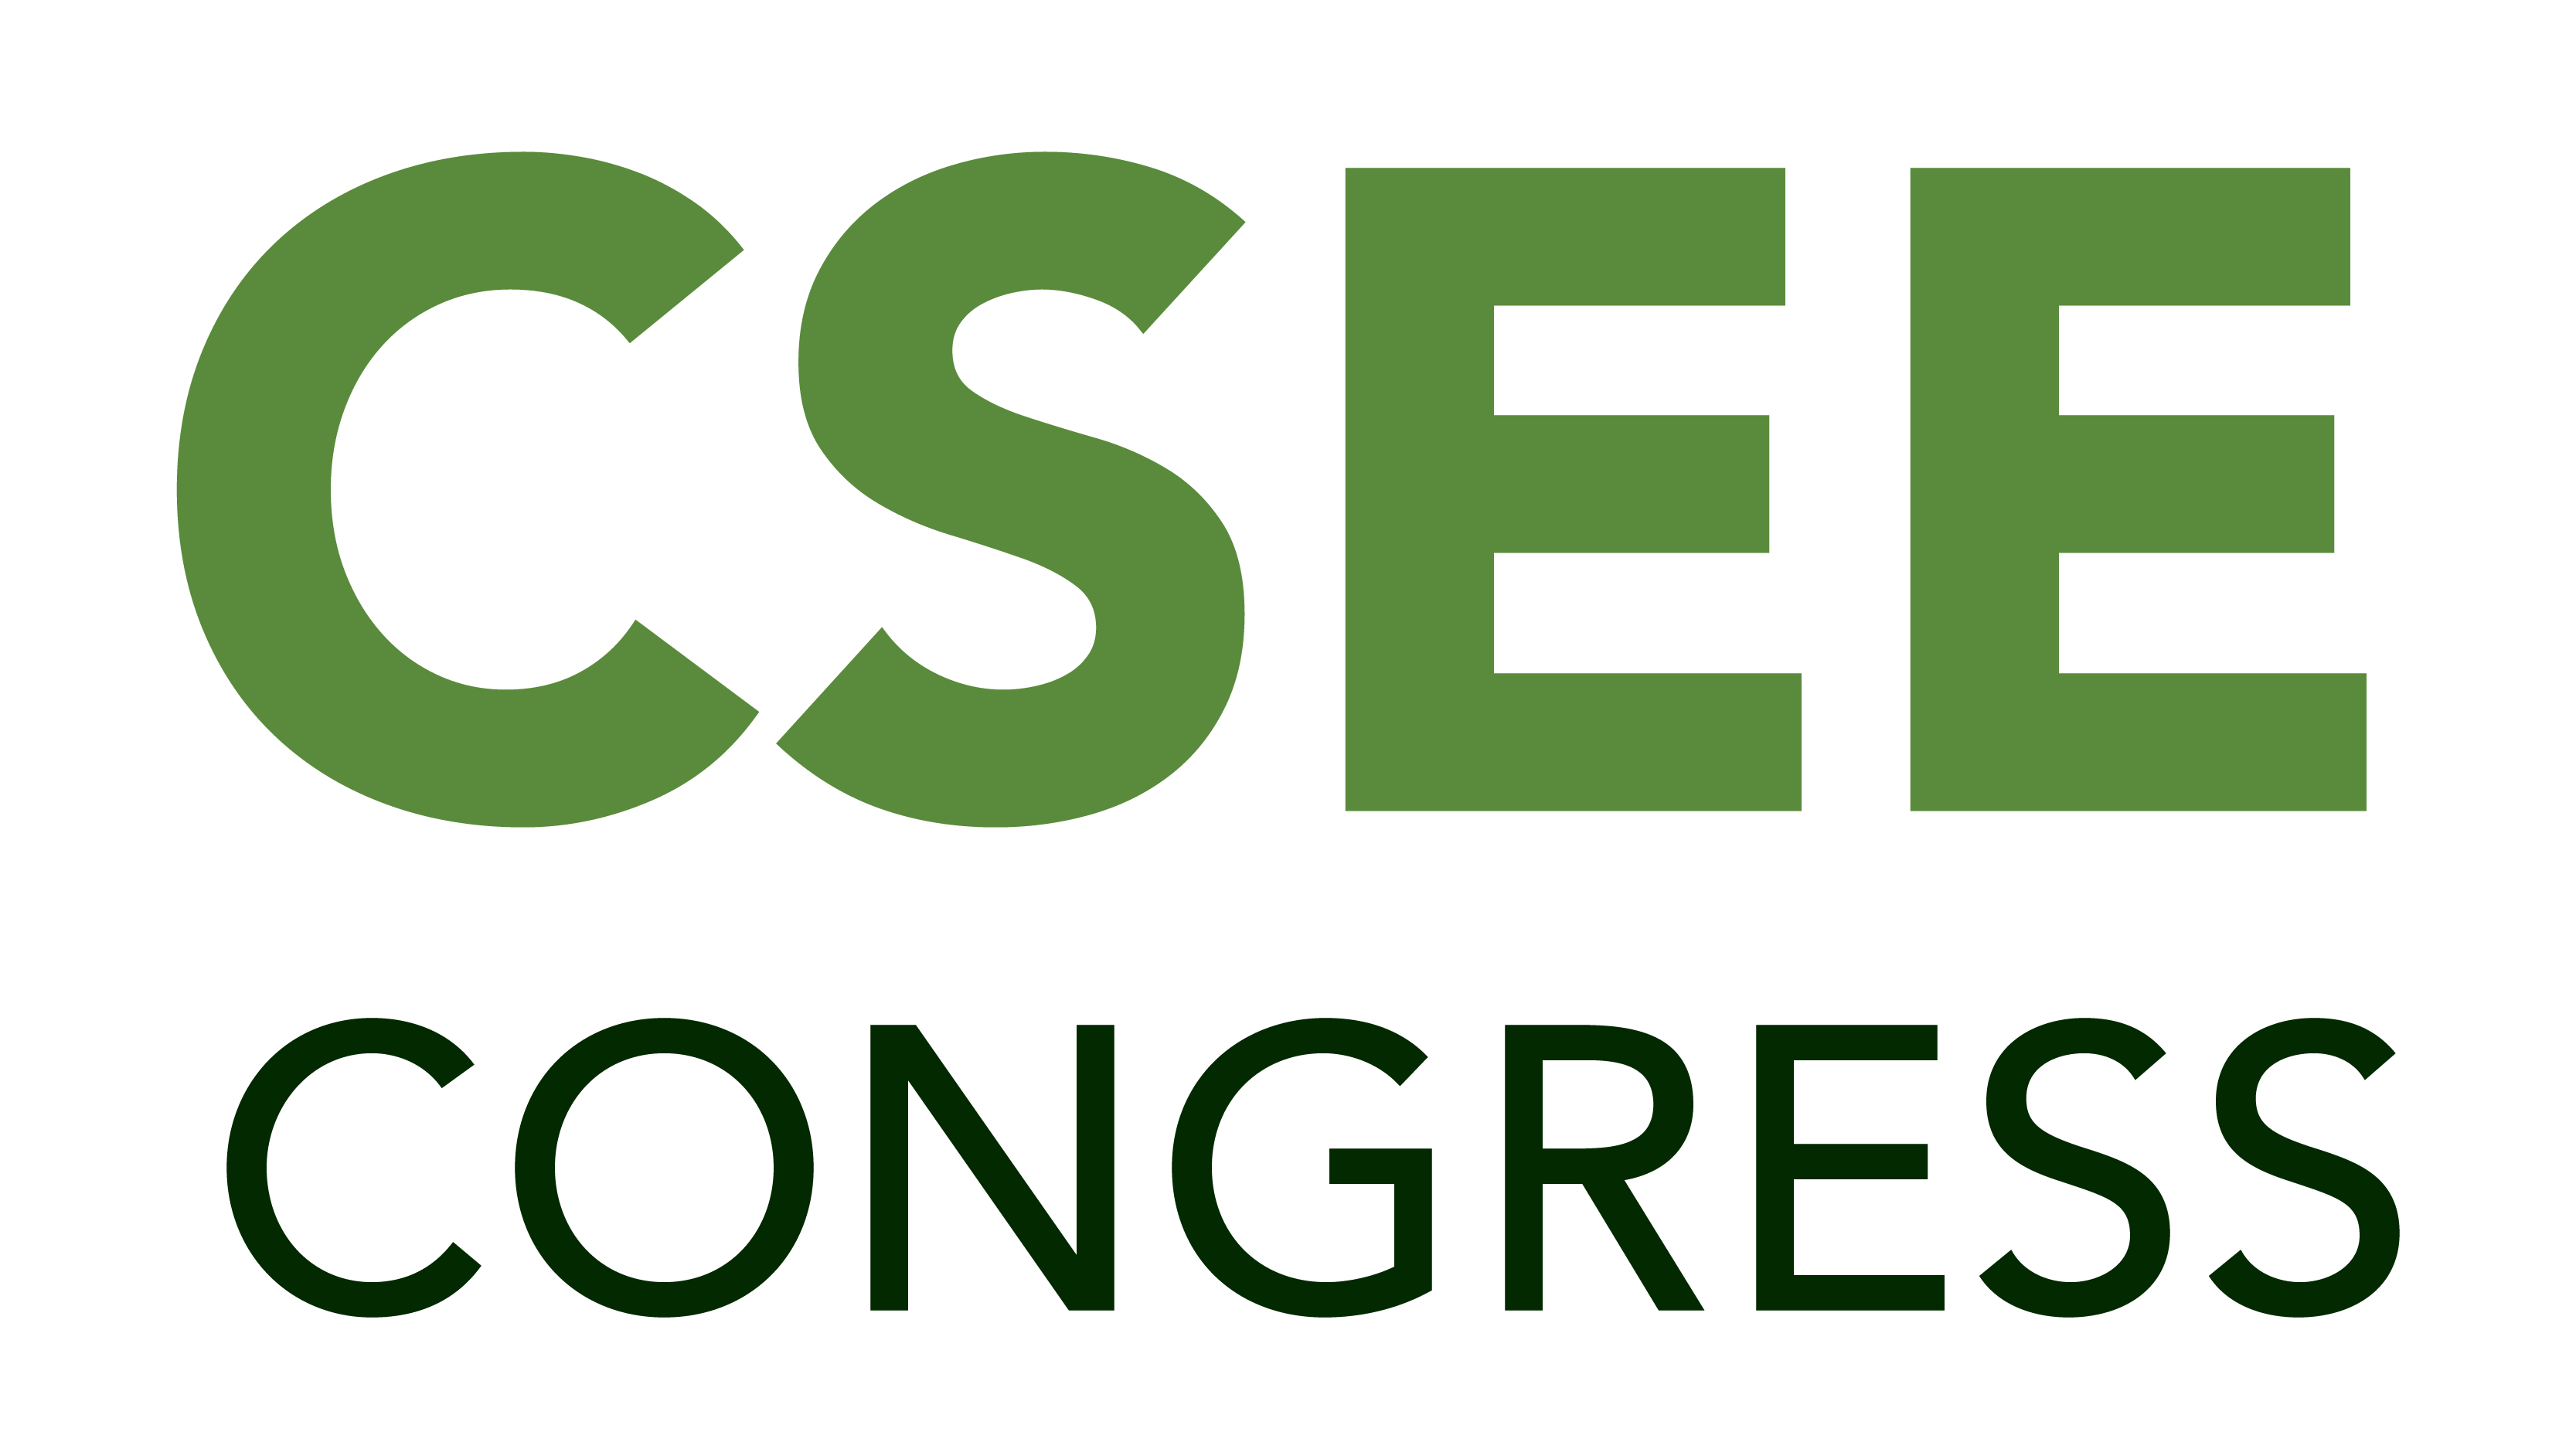 5th World Congress on Civil, Structural, and Environmental Engineering, April, 2020 | Lisbon, Portugal